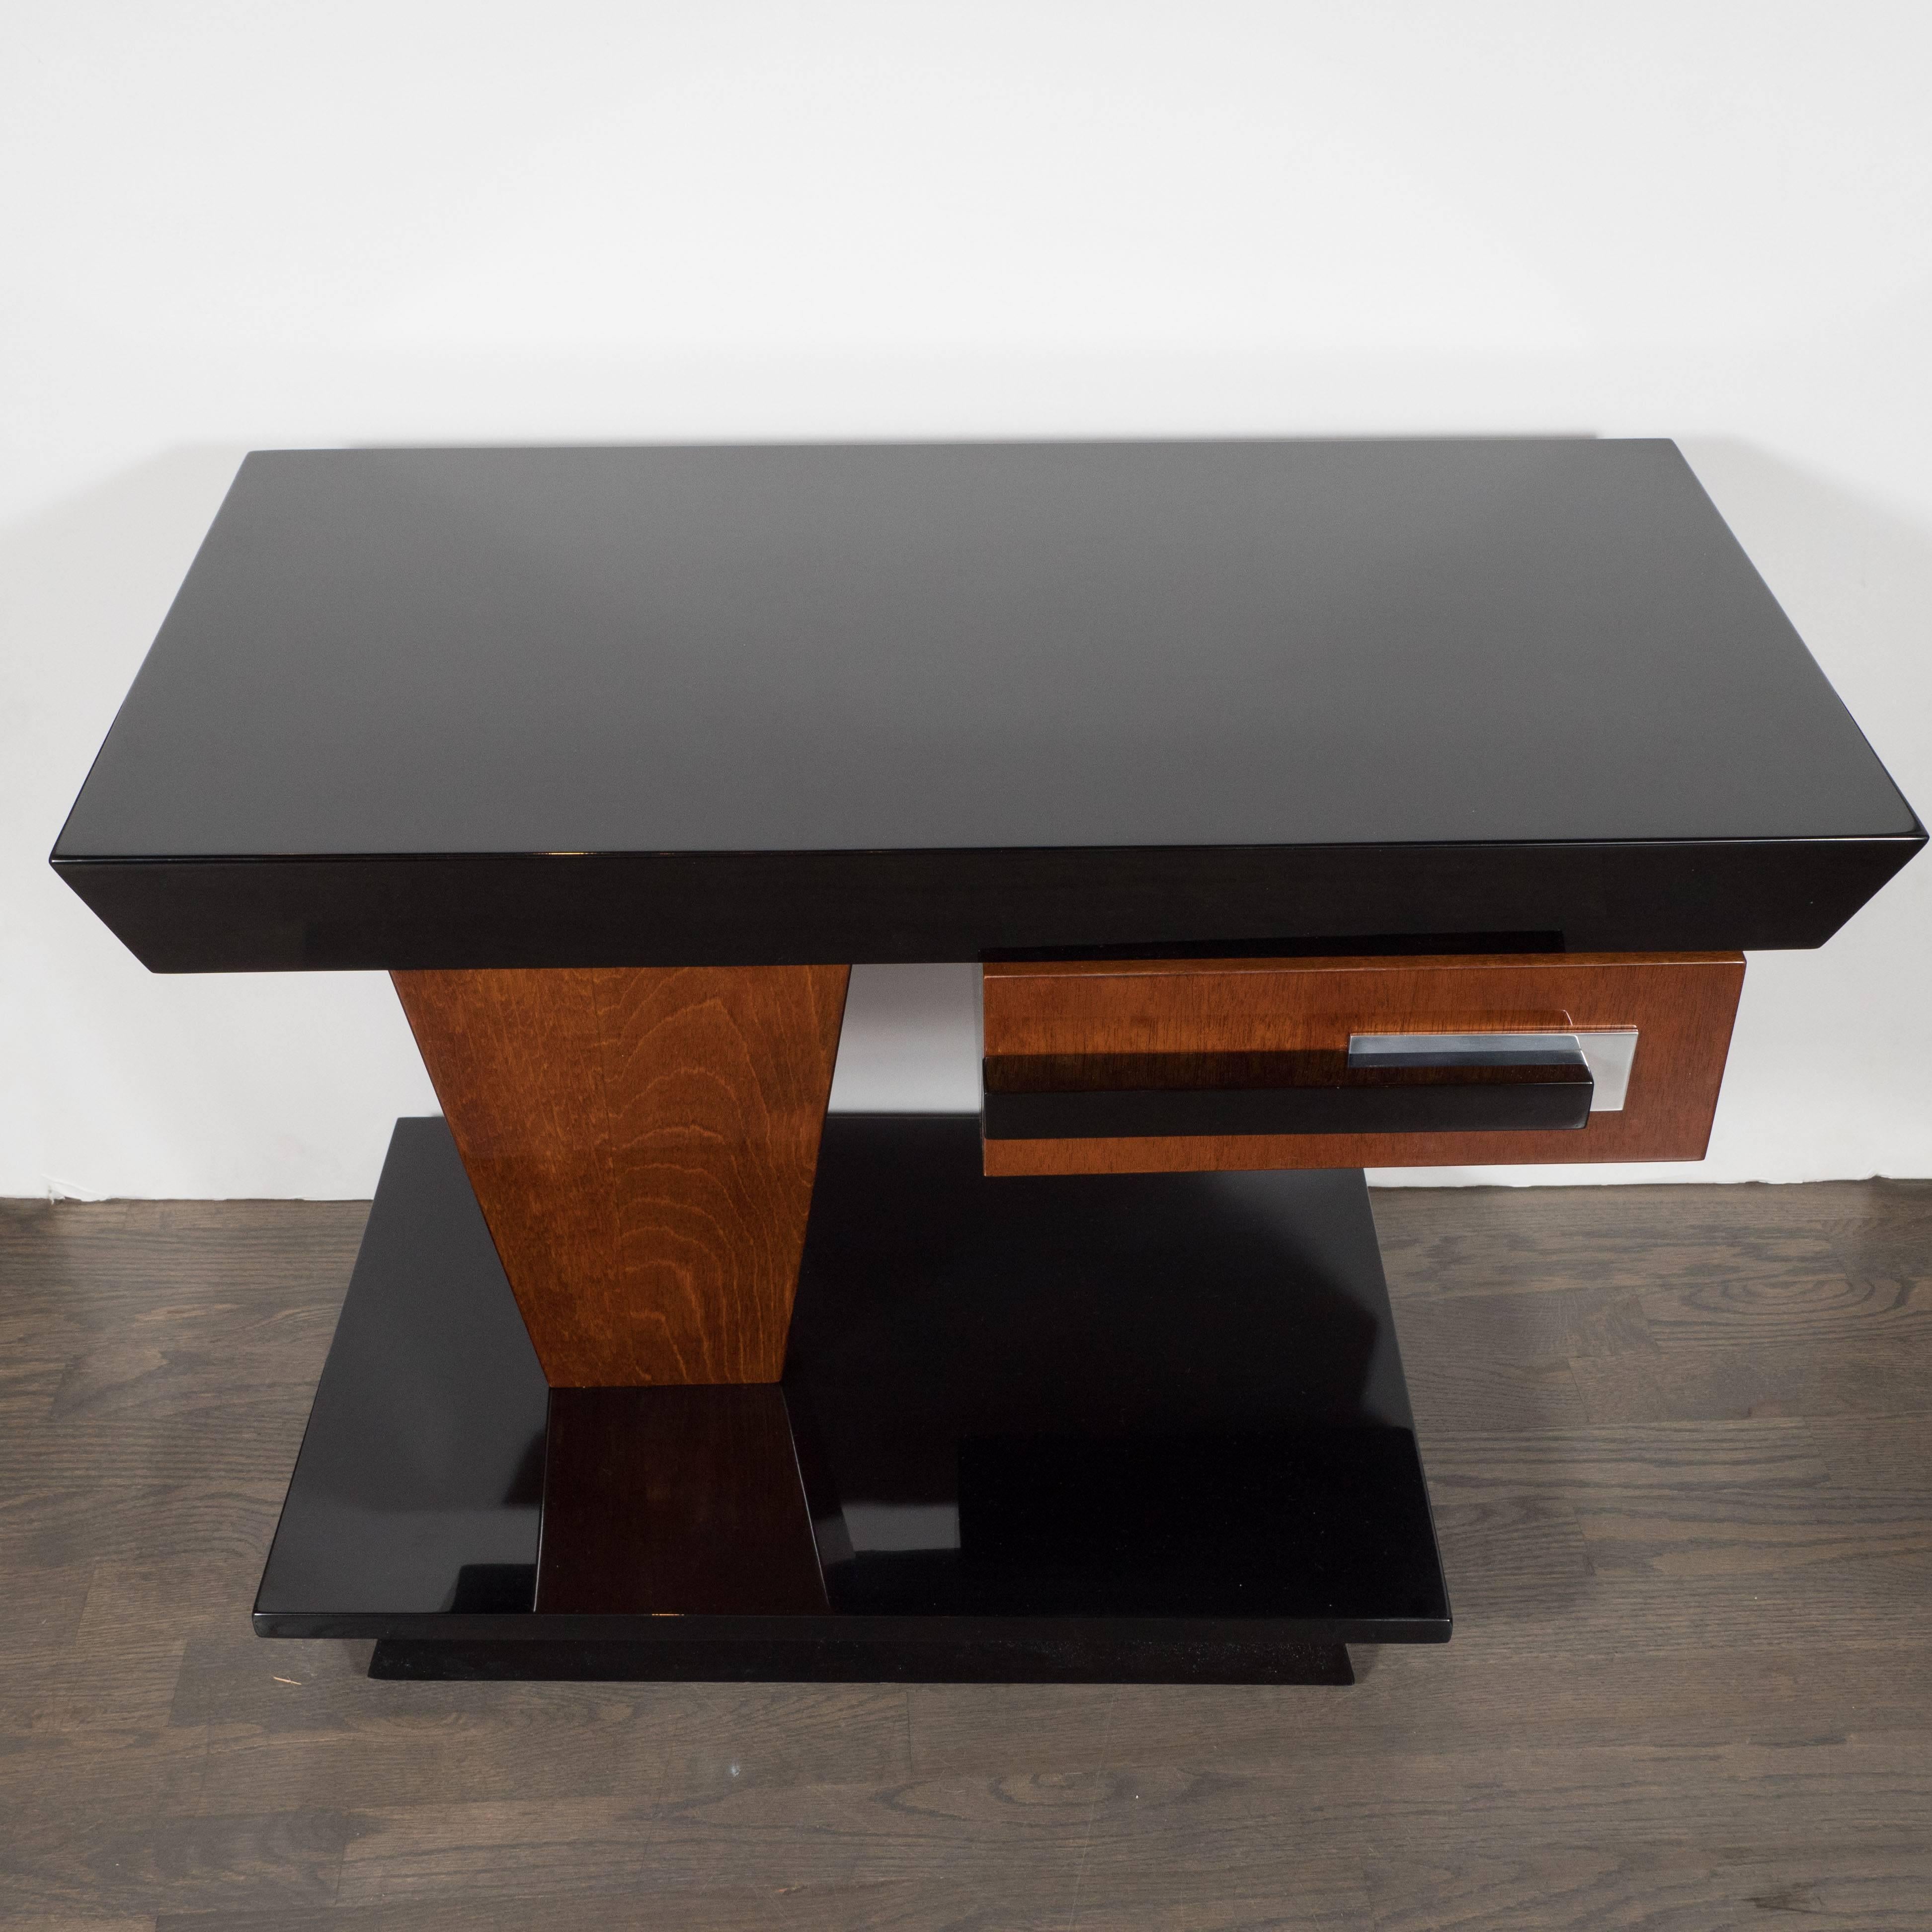 Pair of Art Deco End Tables in Black Lacquer and Burled Walnut by Donald Deskey 1